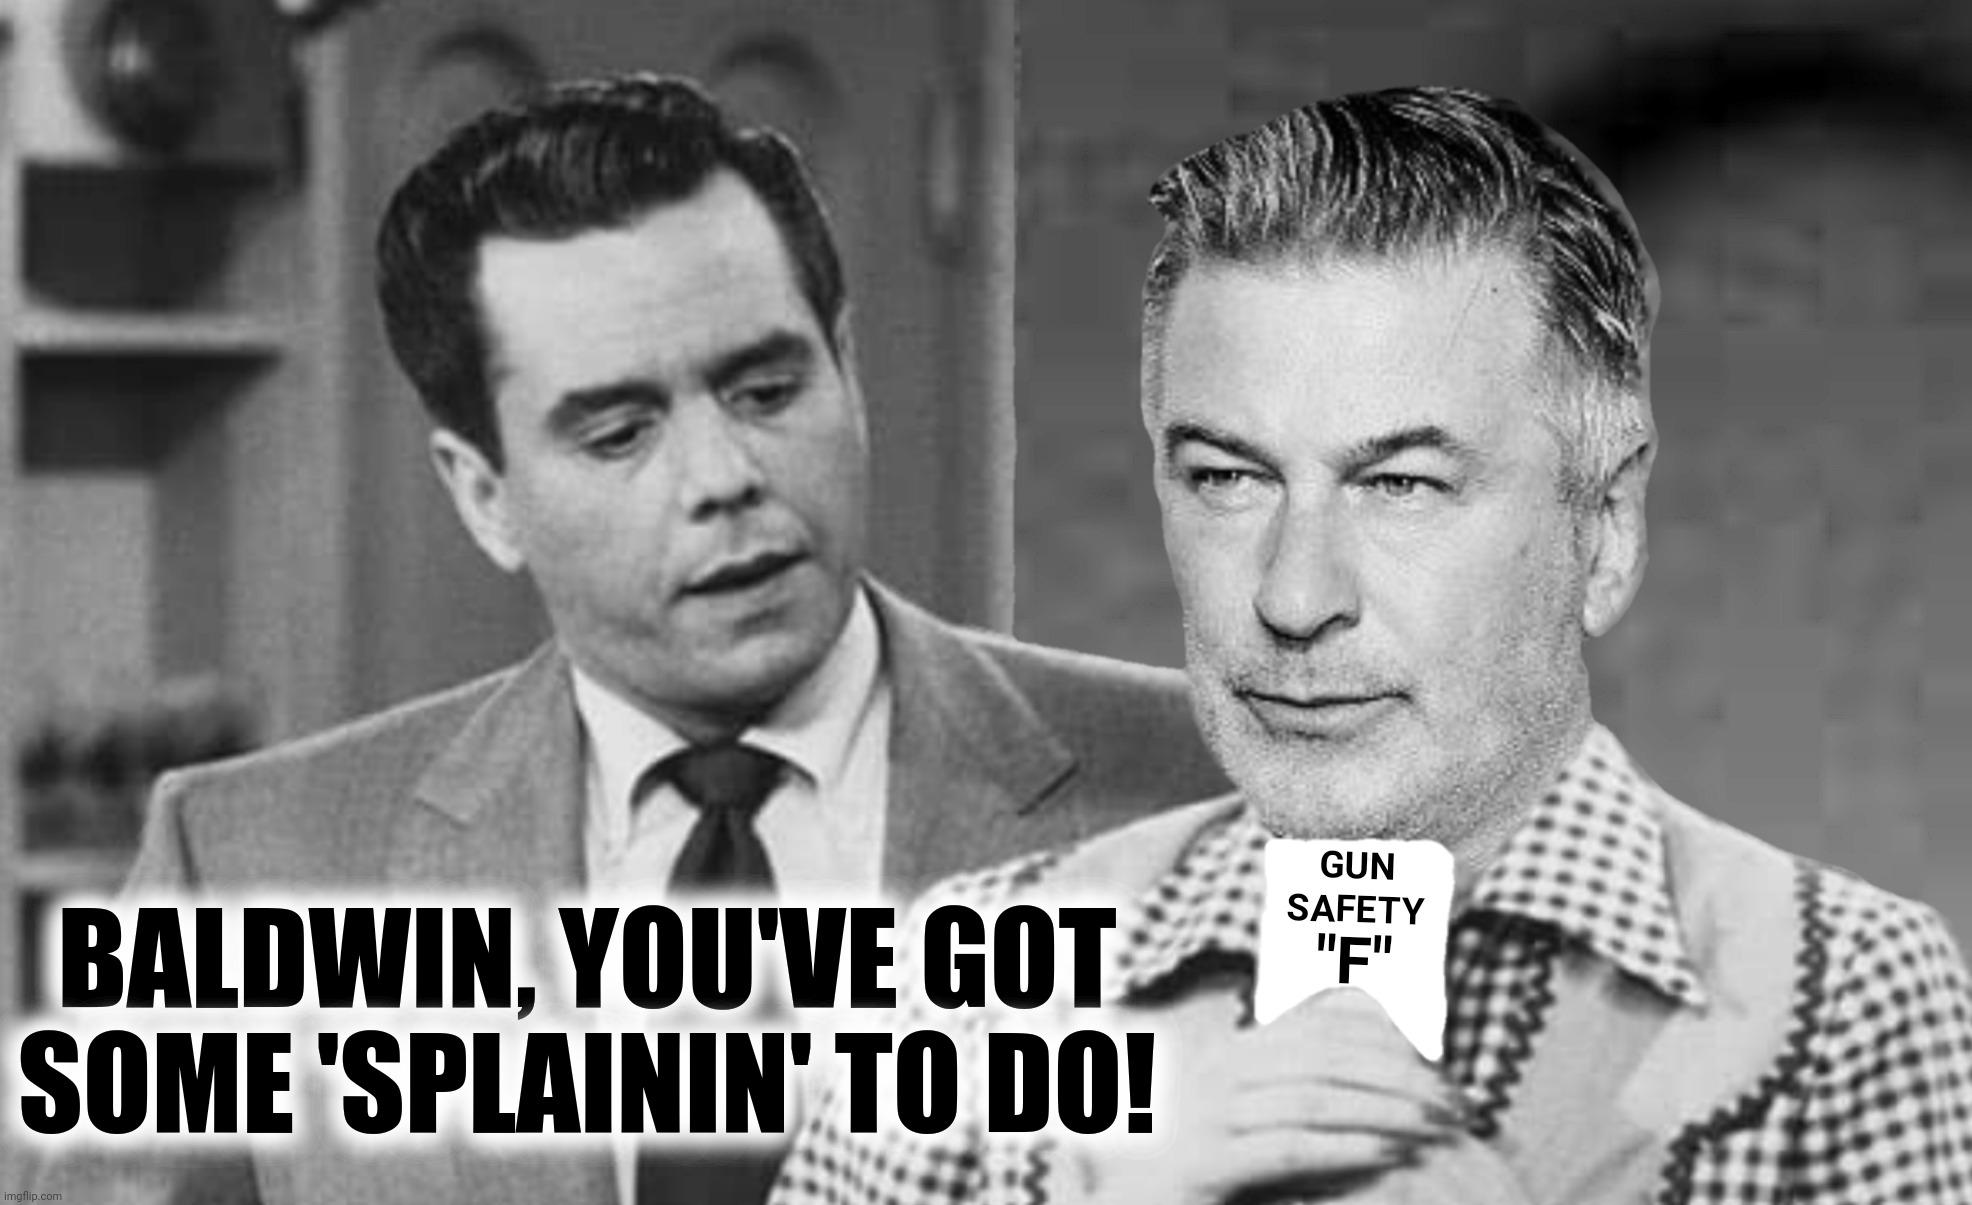 Bad Photoshop Sunday presents:  When you mix ignorance and firearms | BALDWIN, YOU'VE GOT SOME 'SPLAININ' TO DO! | image tagged in bad photoshop sunday,alec baldwin,i love lucy,gun safety | made w/ Imgflip meme maker